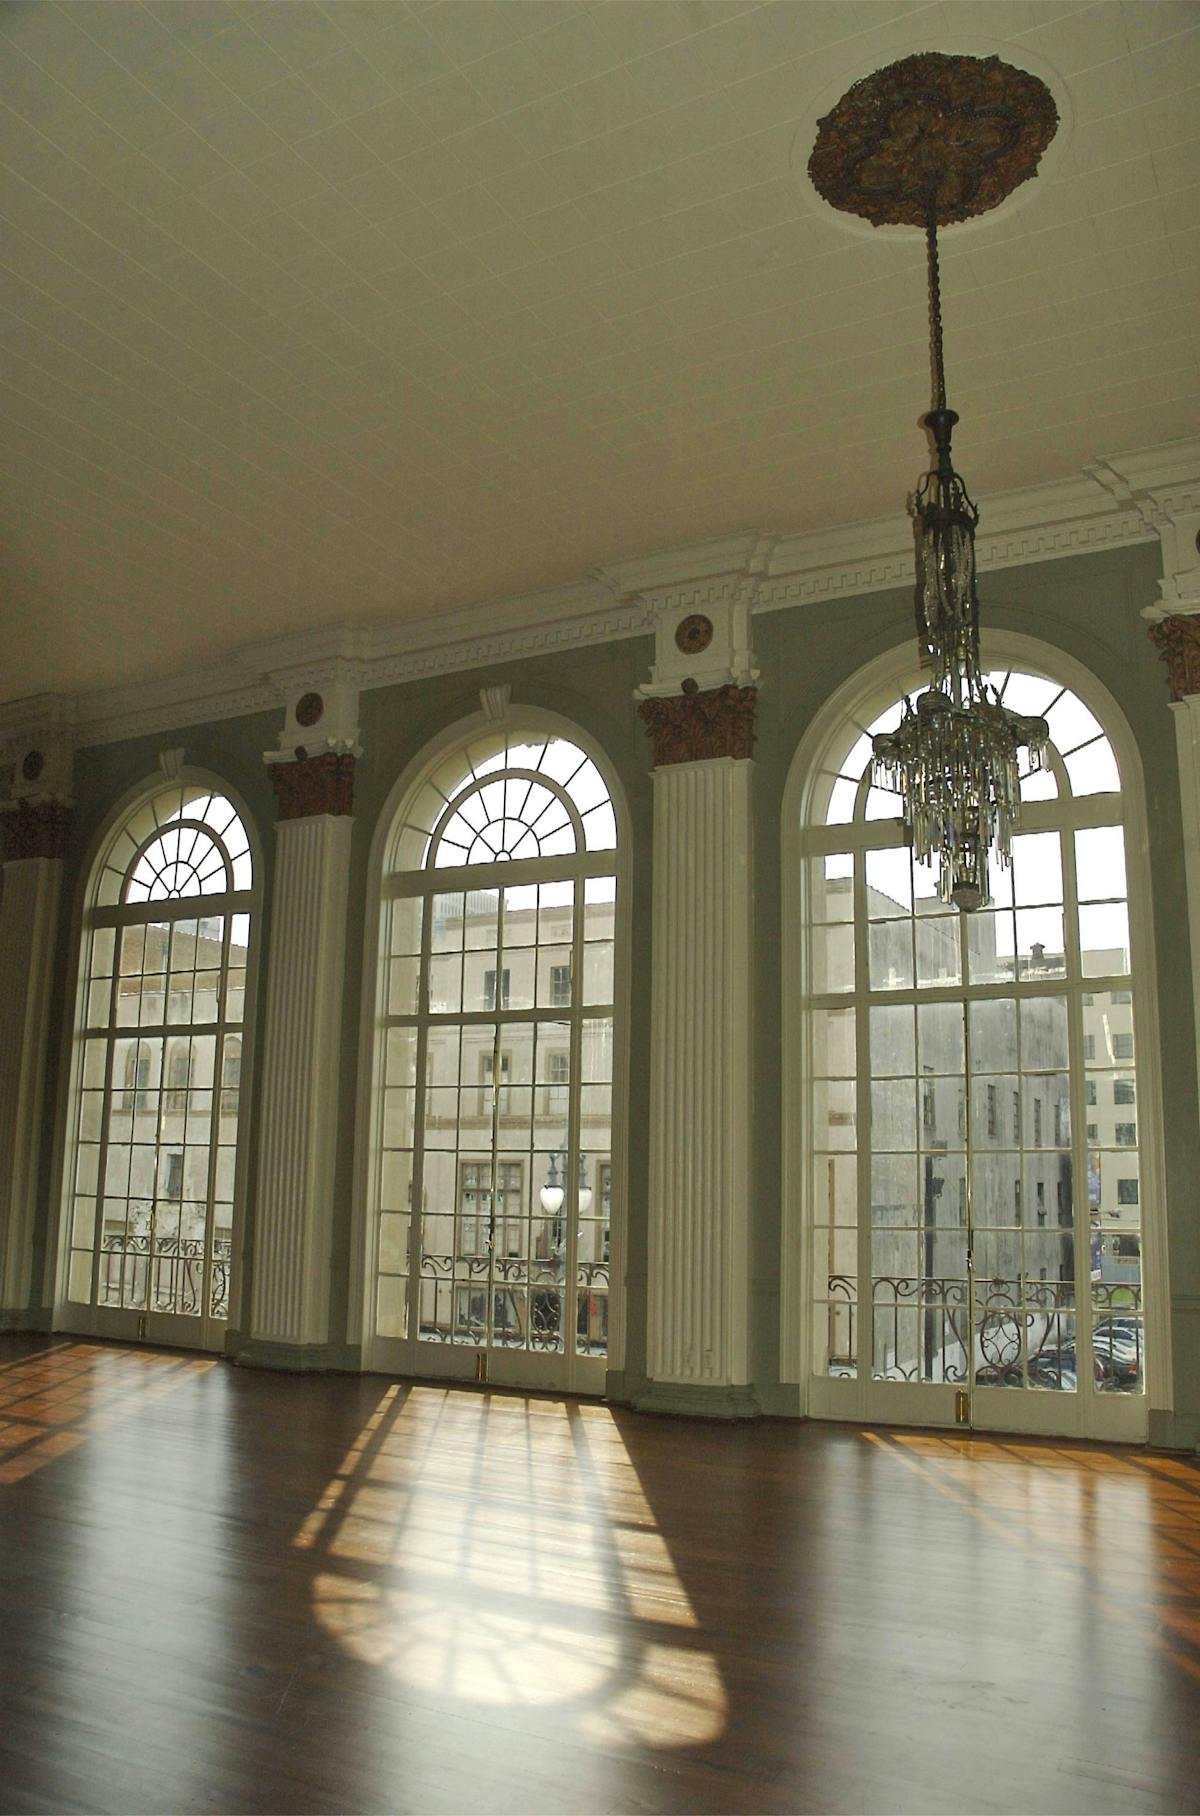 A large room with tall arched windows and a chandelier. It has a high ceiling with a white plaster finish.